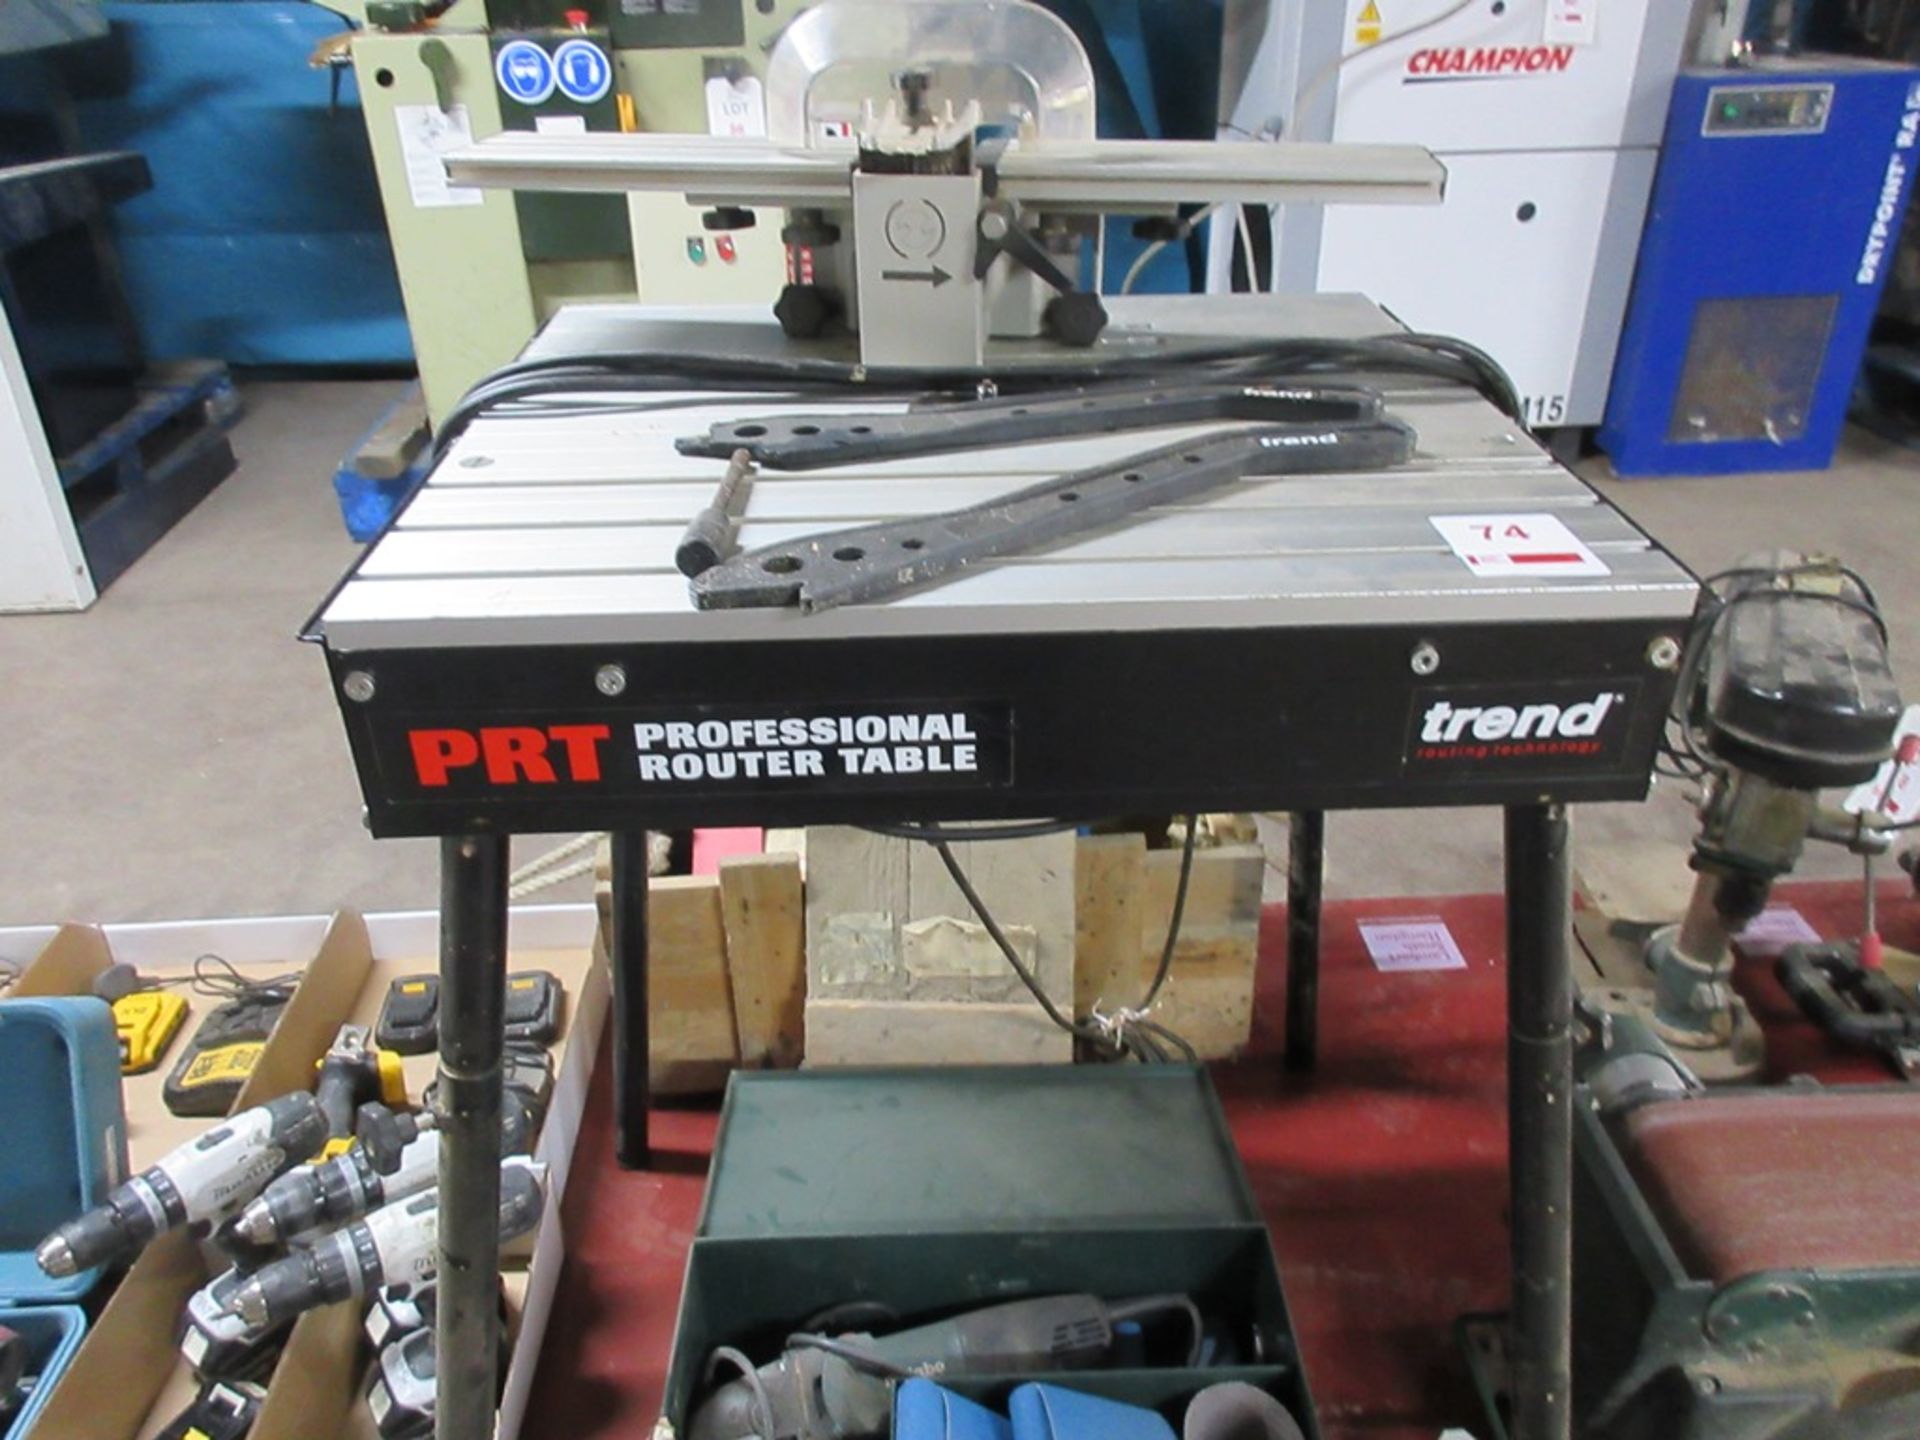 Trend PRT Professional router table, 240v - Image 2 of 4